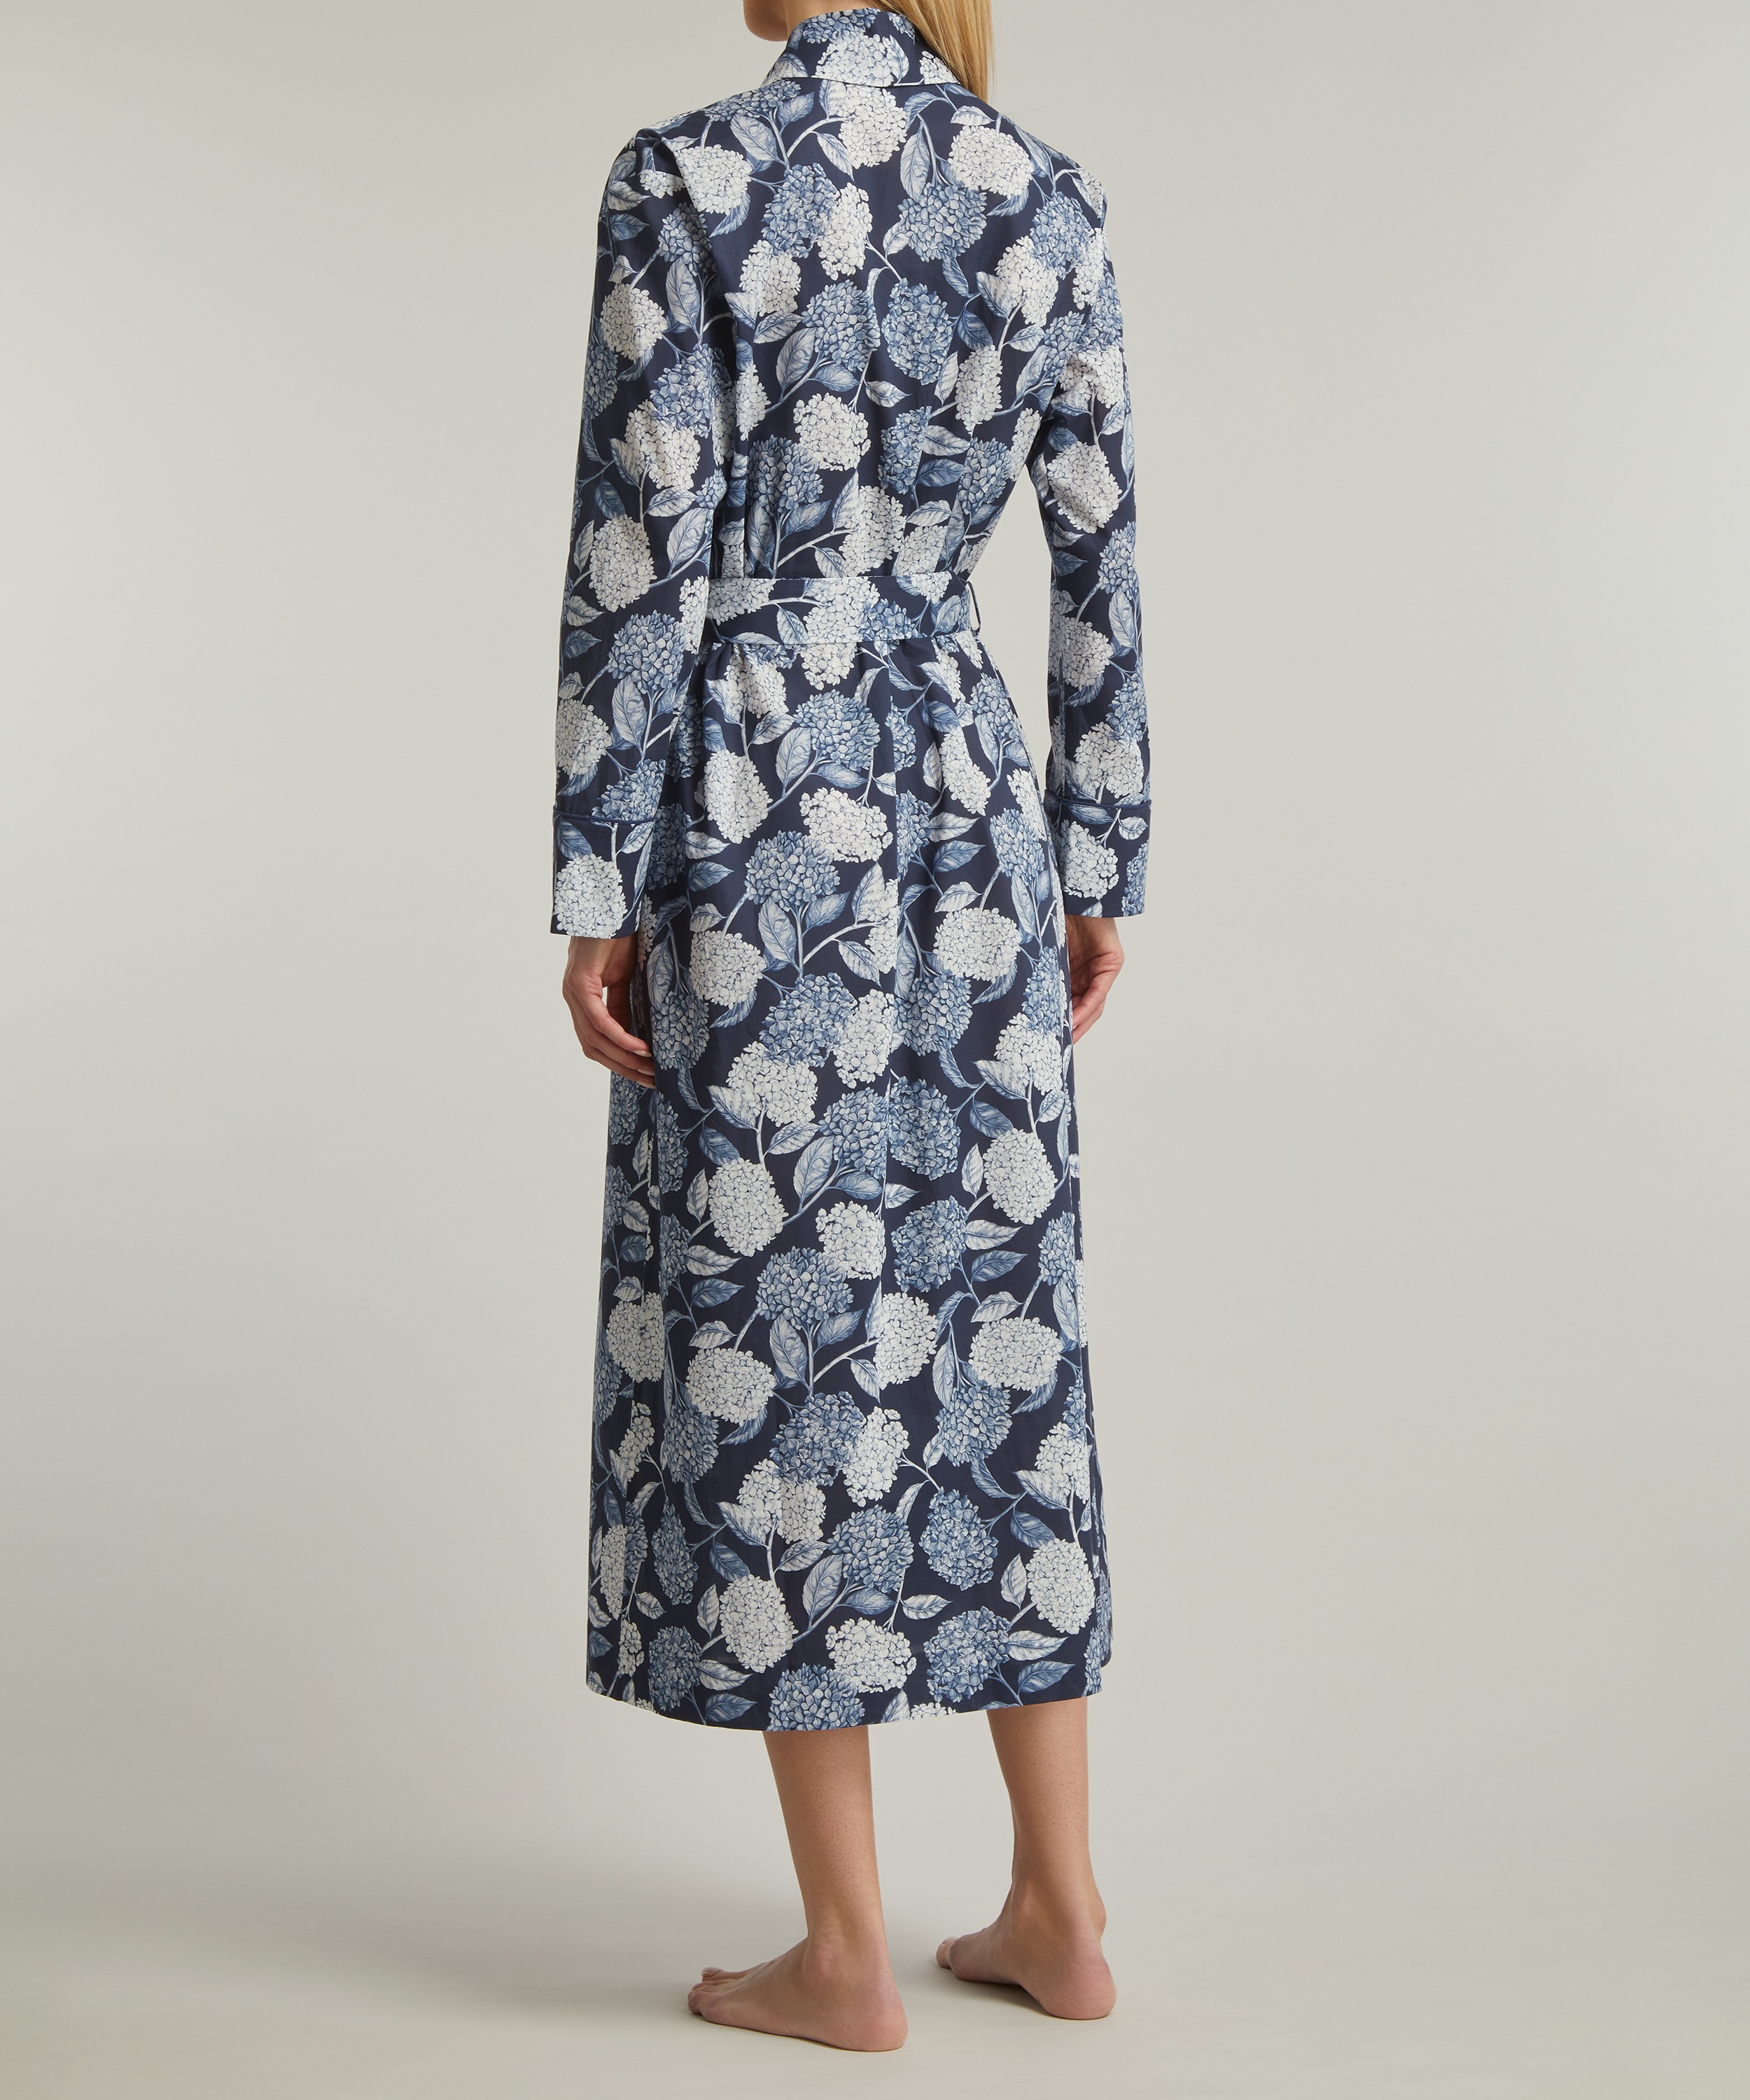 Liberty - Azores Tana Lawn™ Cotton Classic Robe image number 3